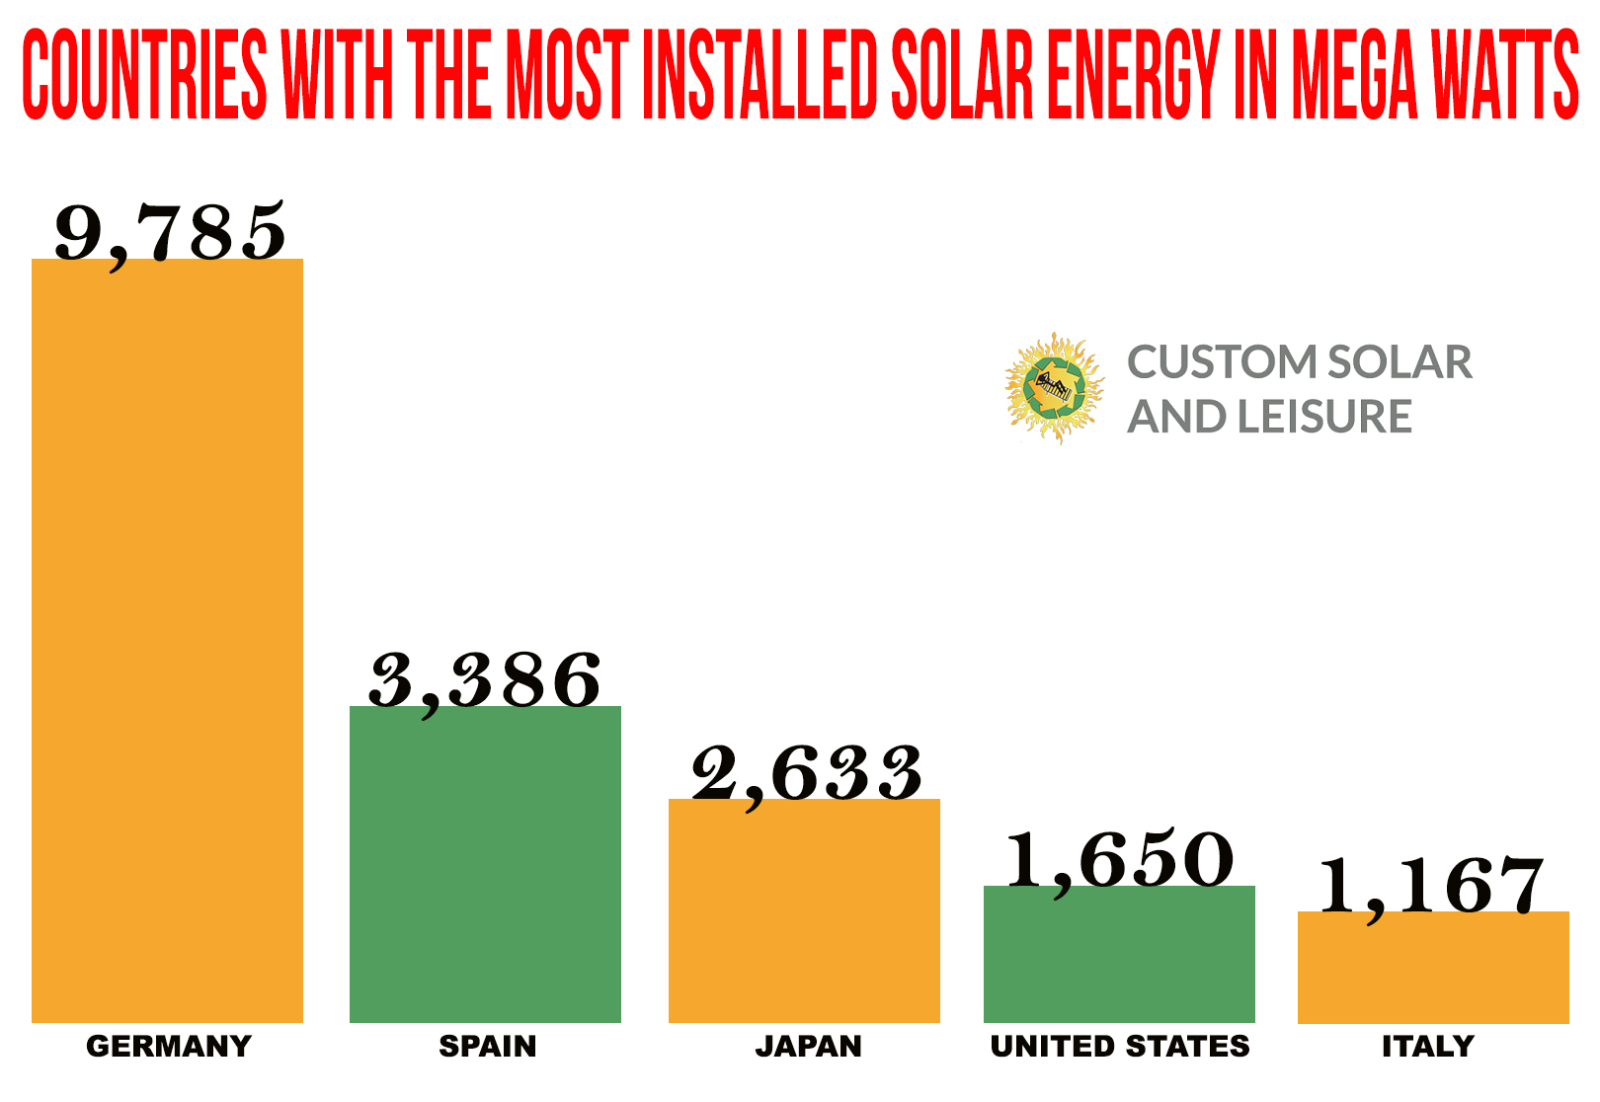 Countries With the Most Installed Solar Energy in Mega Watts Visual.ly